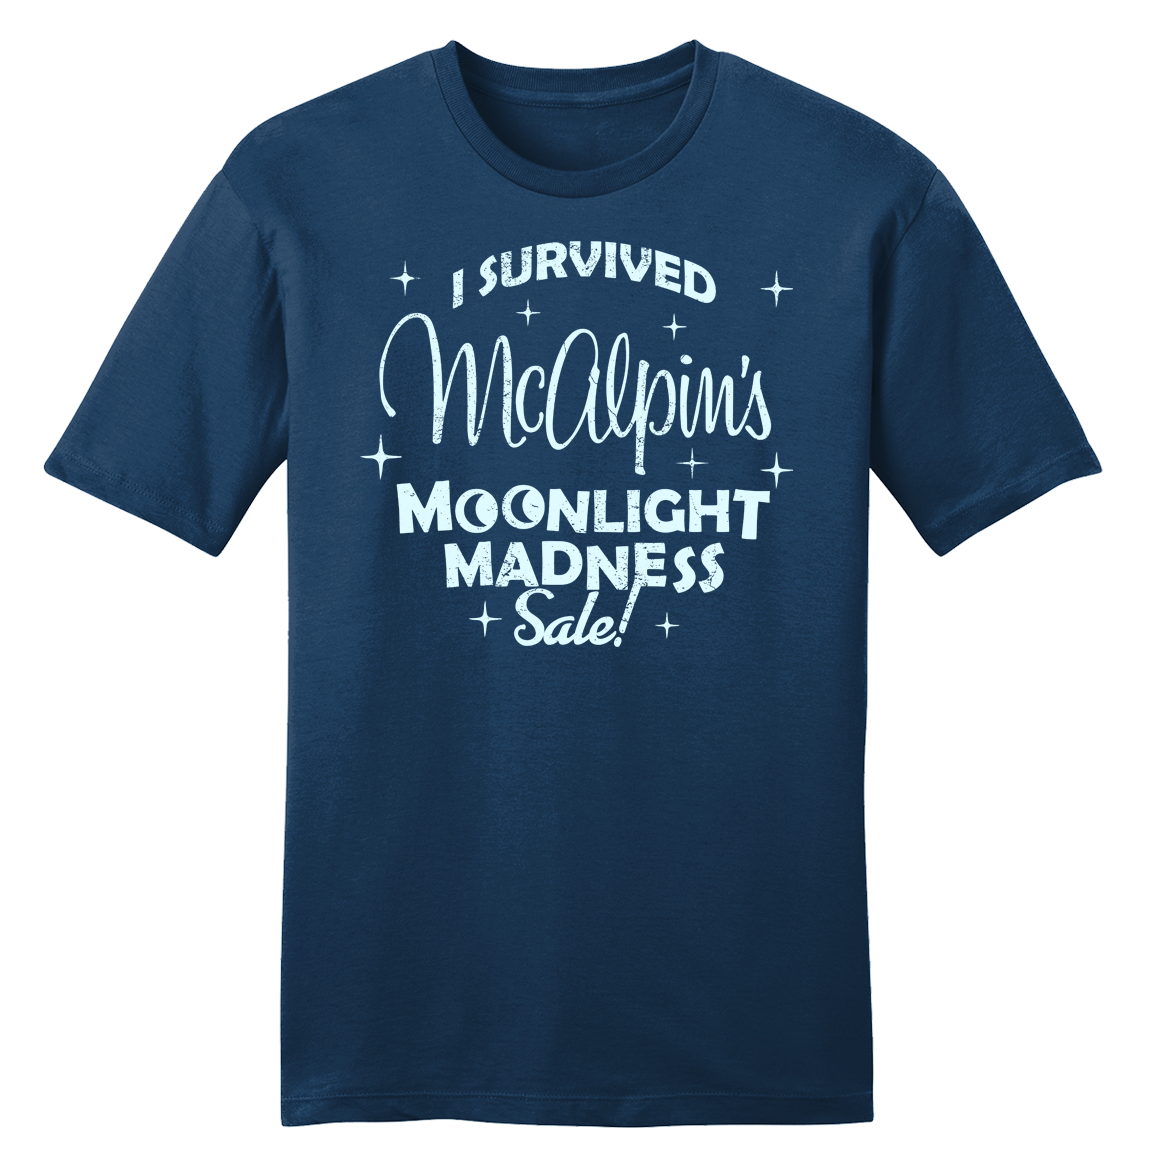 I Survived McAlpin's Moonlight Madness Sale - Cincy Shirts